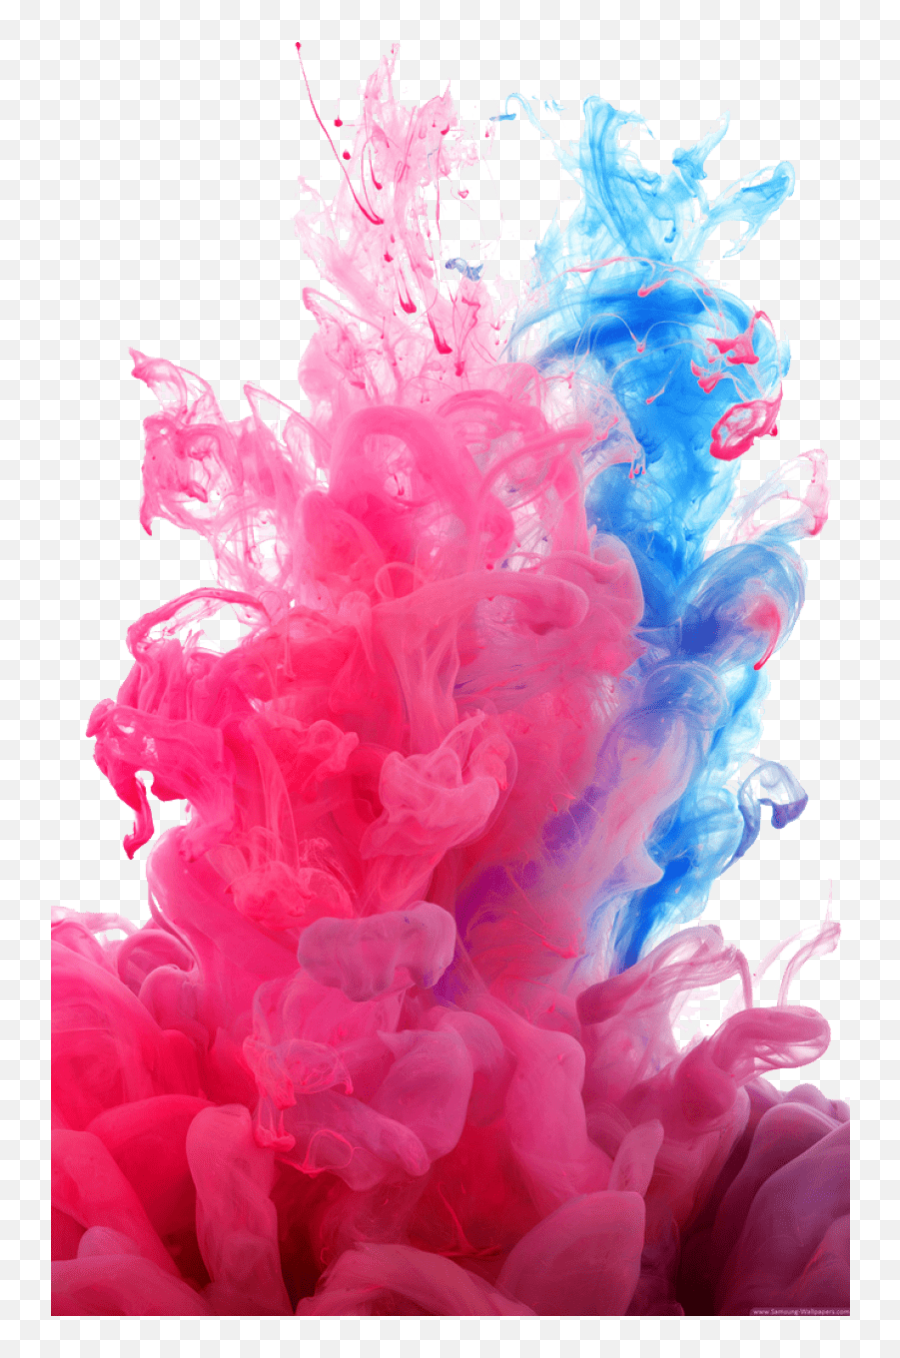 Download Free Png Colorful - Smoke Wallpaper White Background,Fog Effect Png